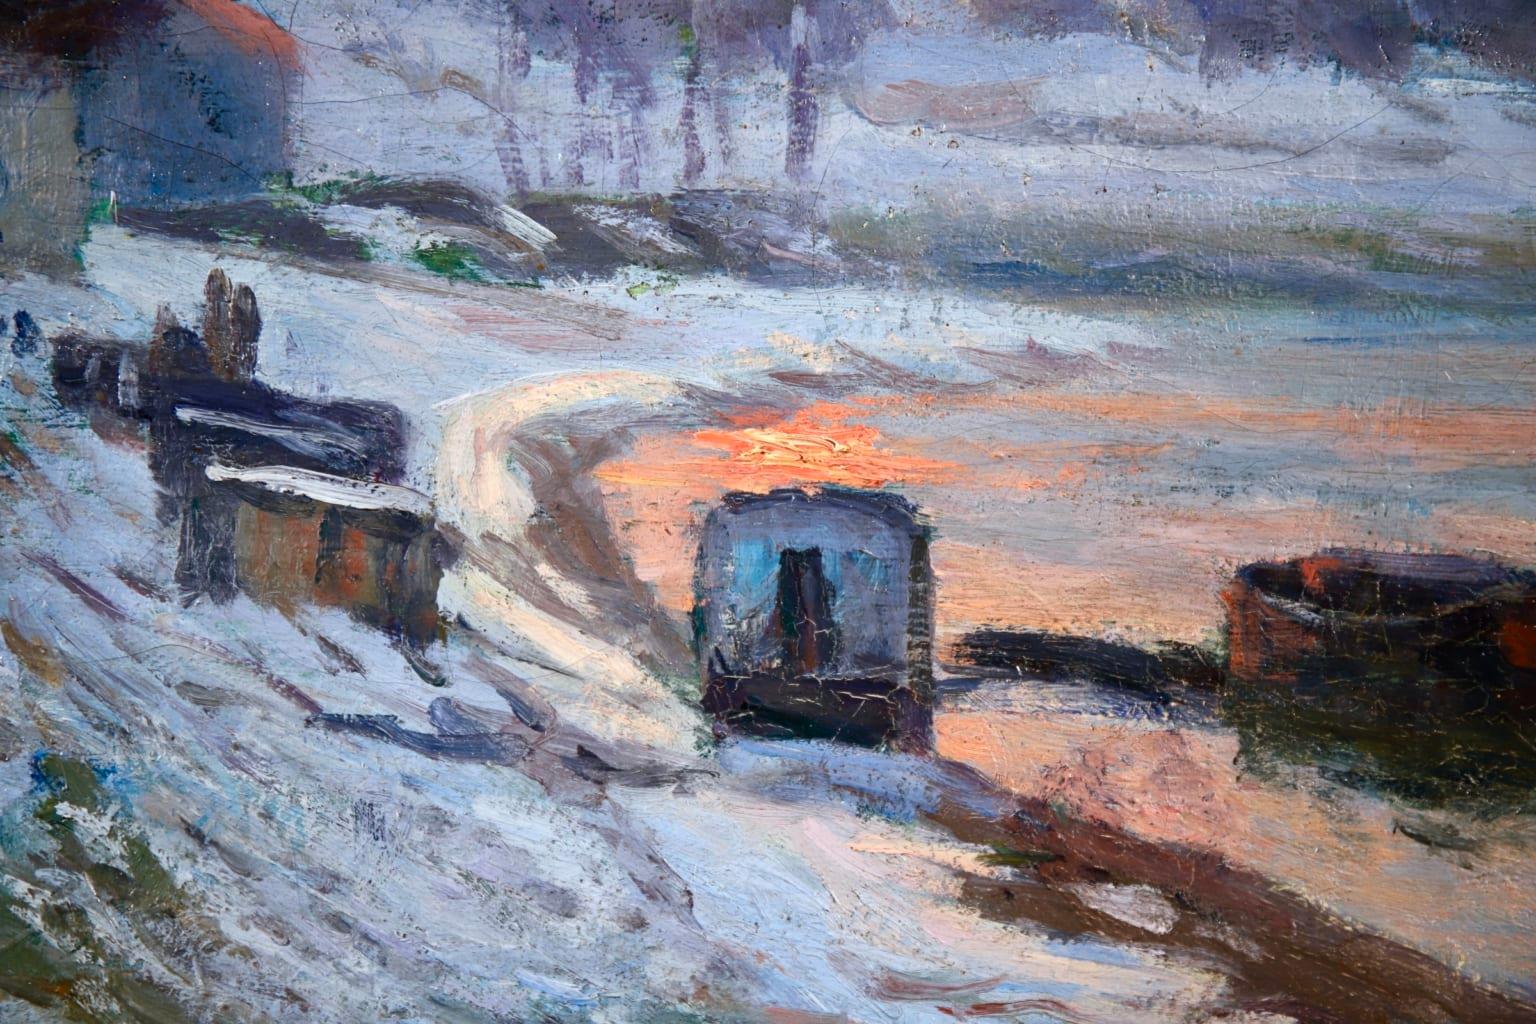 Snow on the Seine - Impressionist Winter River Landscape by Armand Guillaumin 1